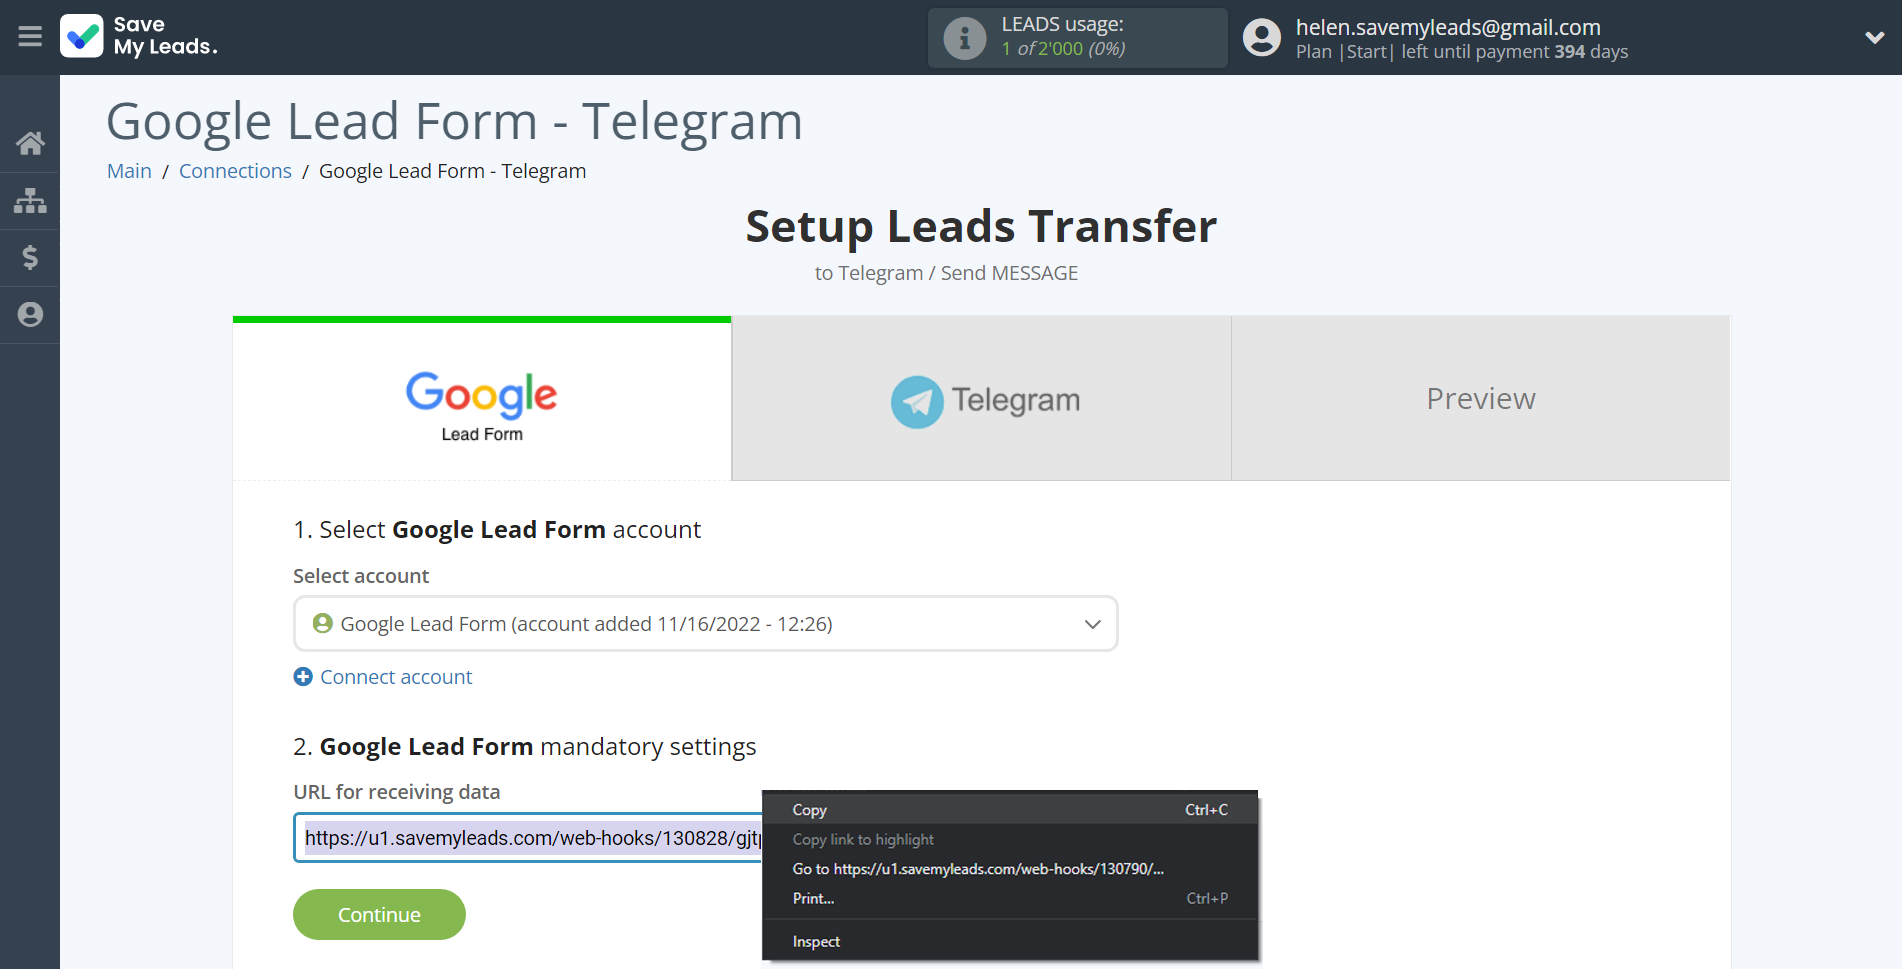 How to Connect Google Lead Form with Telegram | Data Source account connection